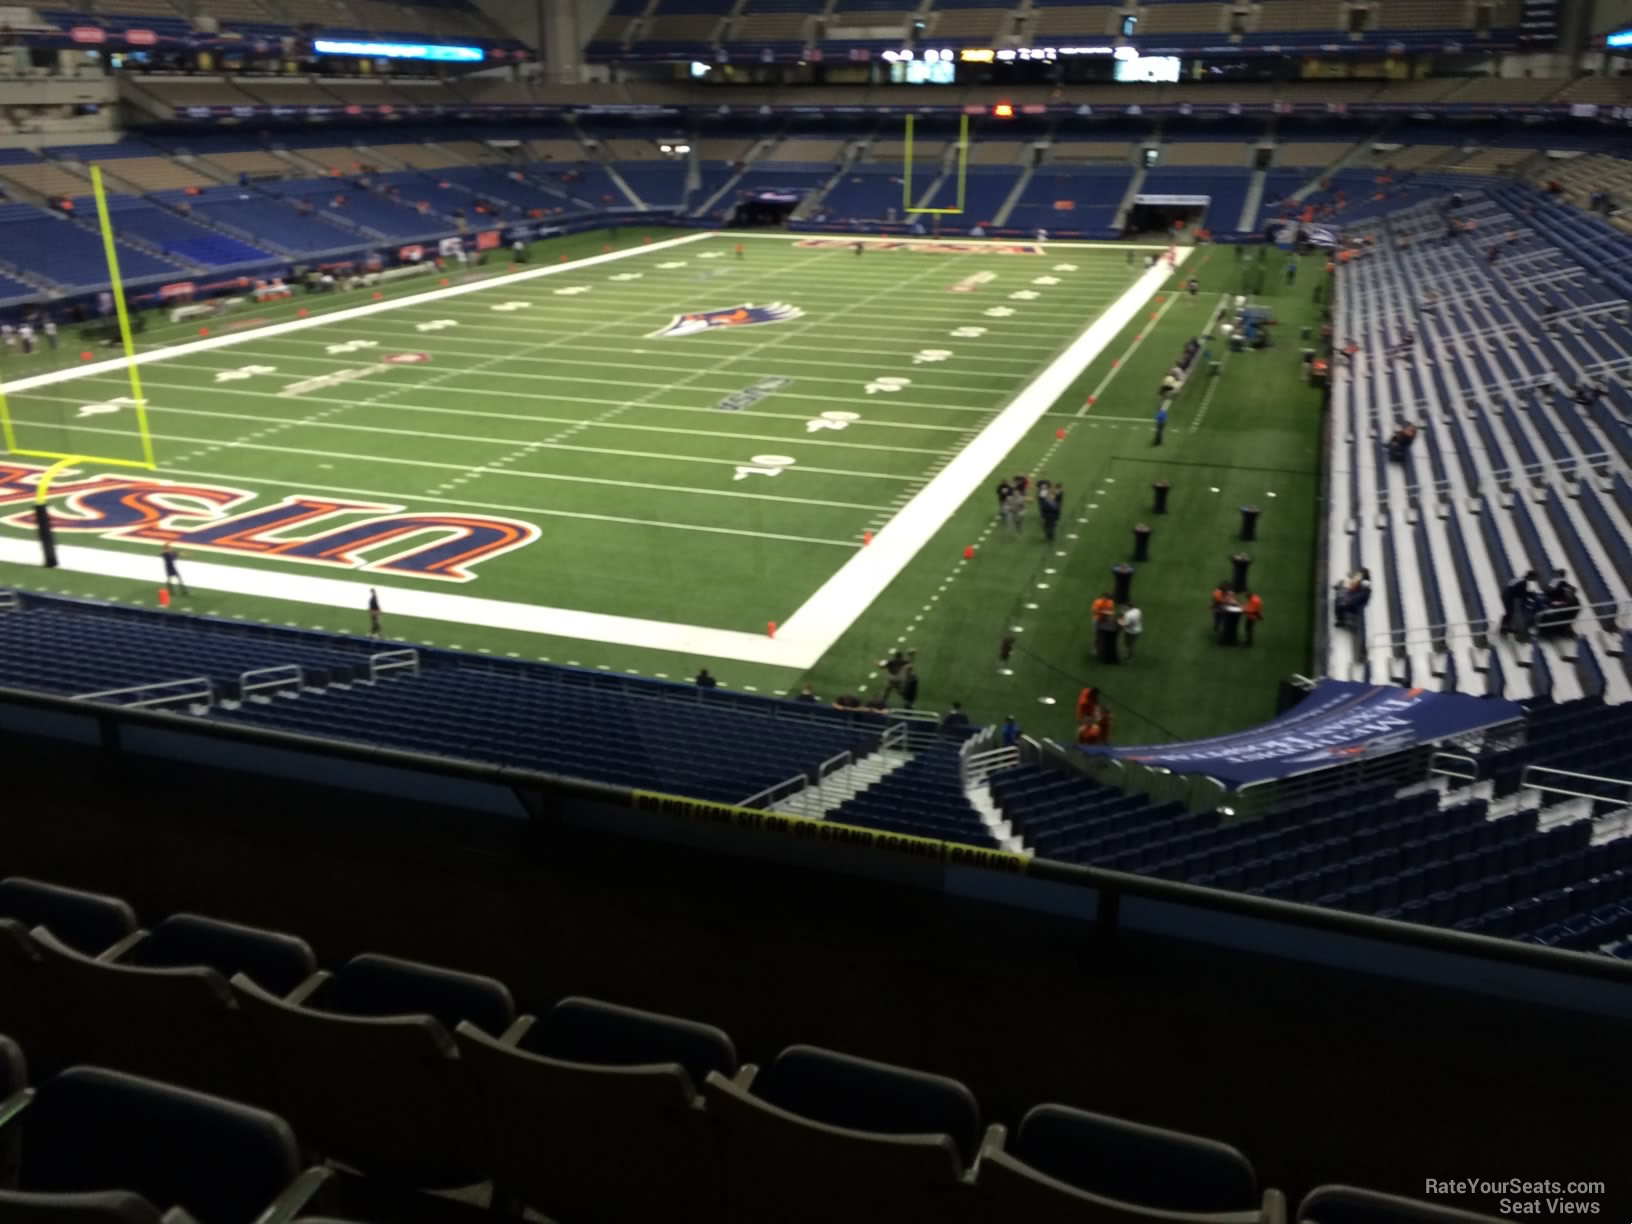 section 242, row 5 seat view  for football - alamodome